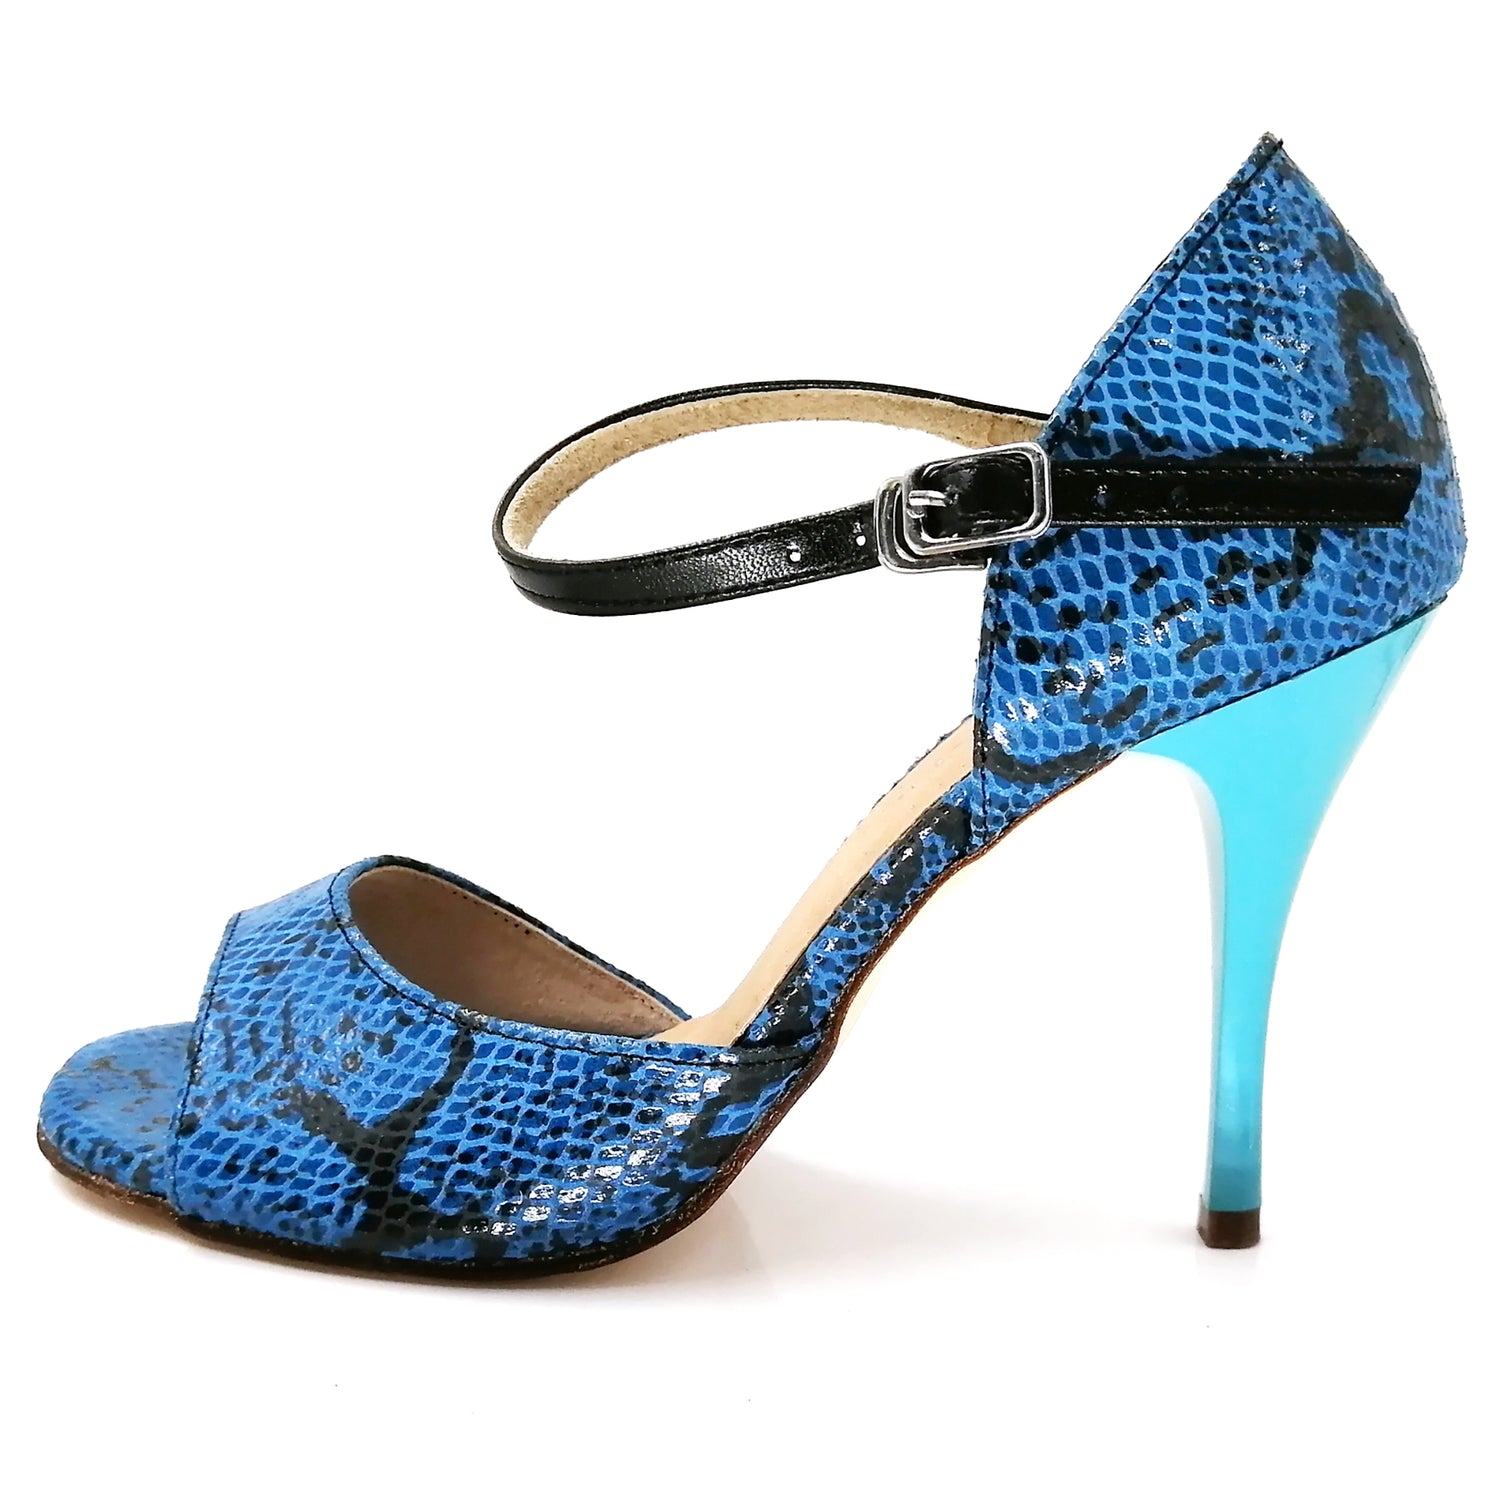 Pro Dancer Argentine Tango High Heel Sandals with Blue Leather Sole - PD-9001E1